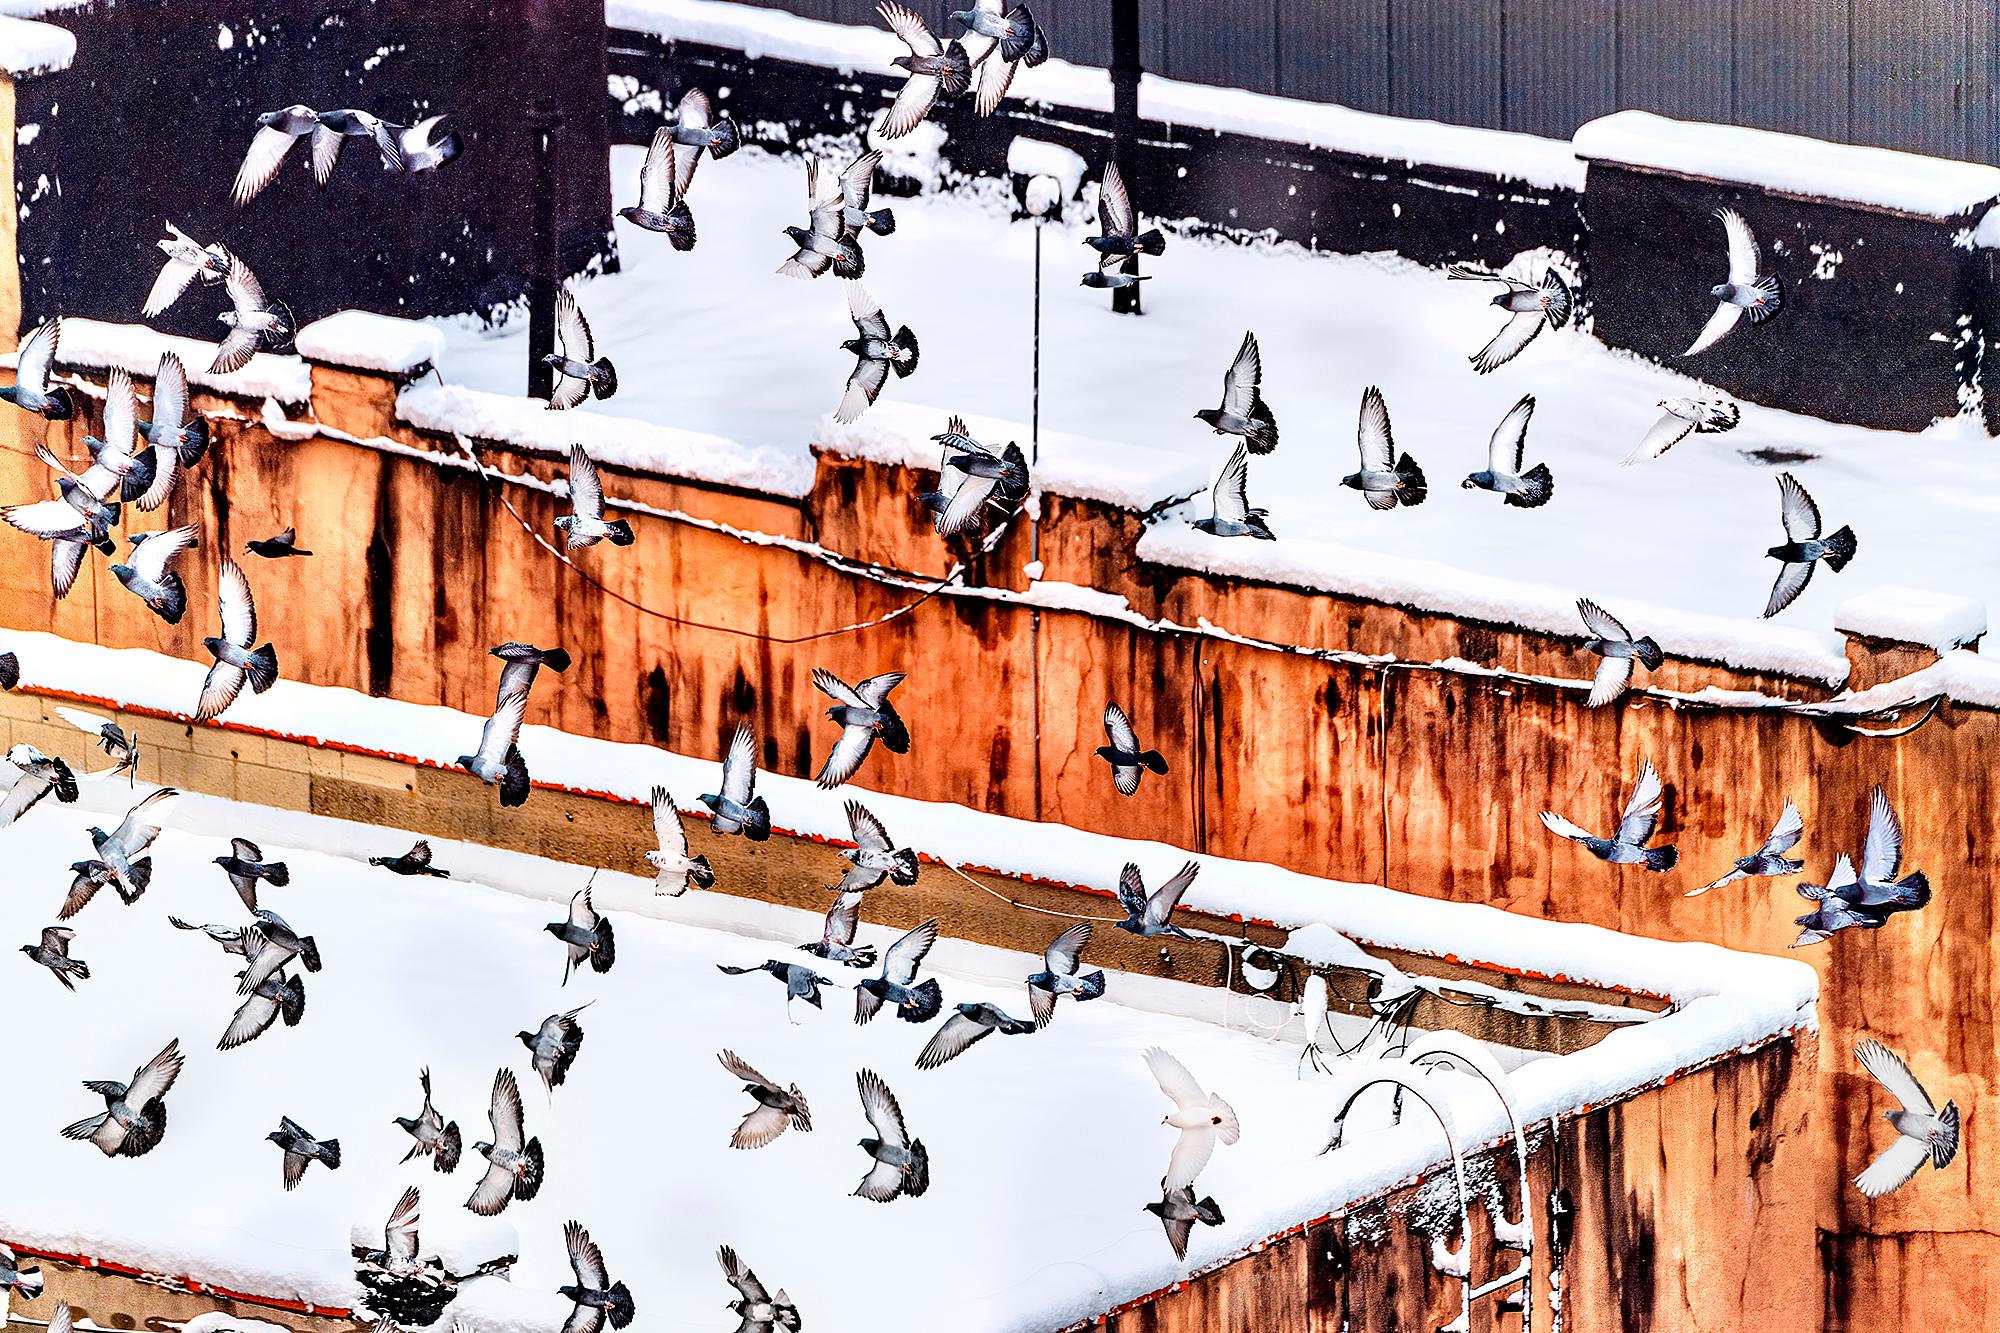 Mitchell Funk Abstract Photograph – Flock of Birds over New York City Rooftops (Abstrakte Fotografie)